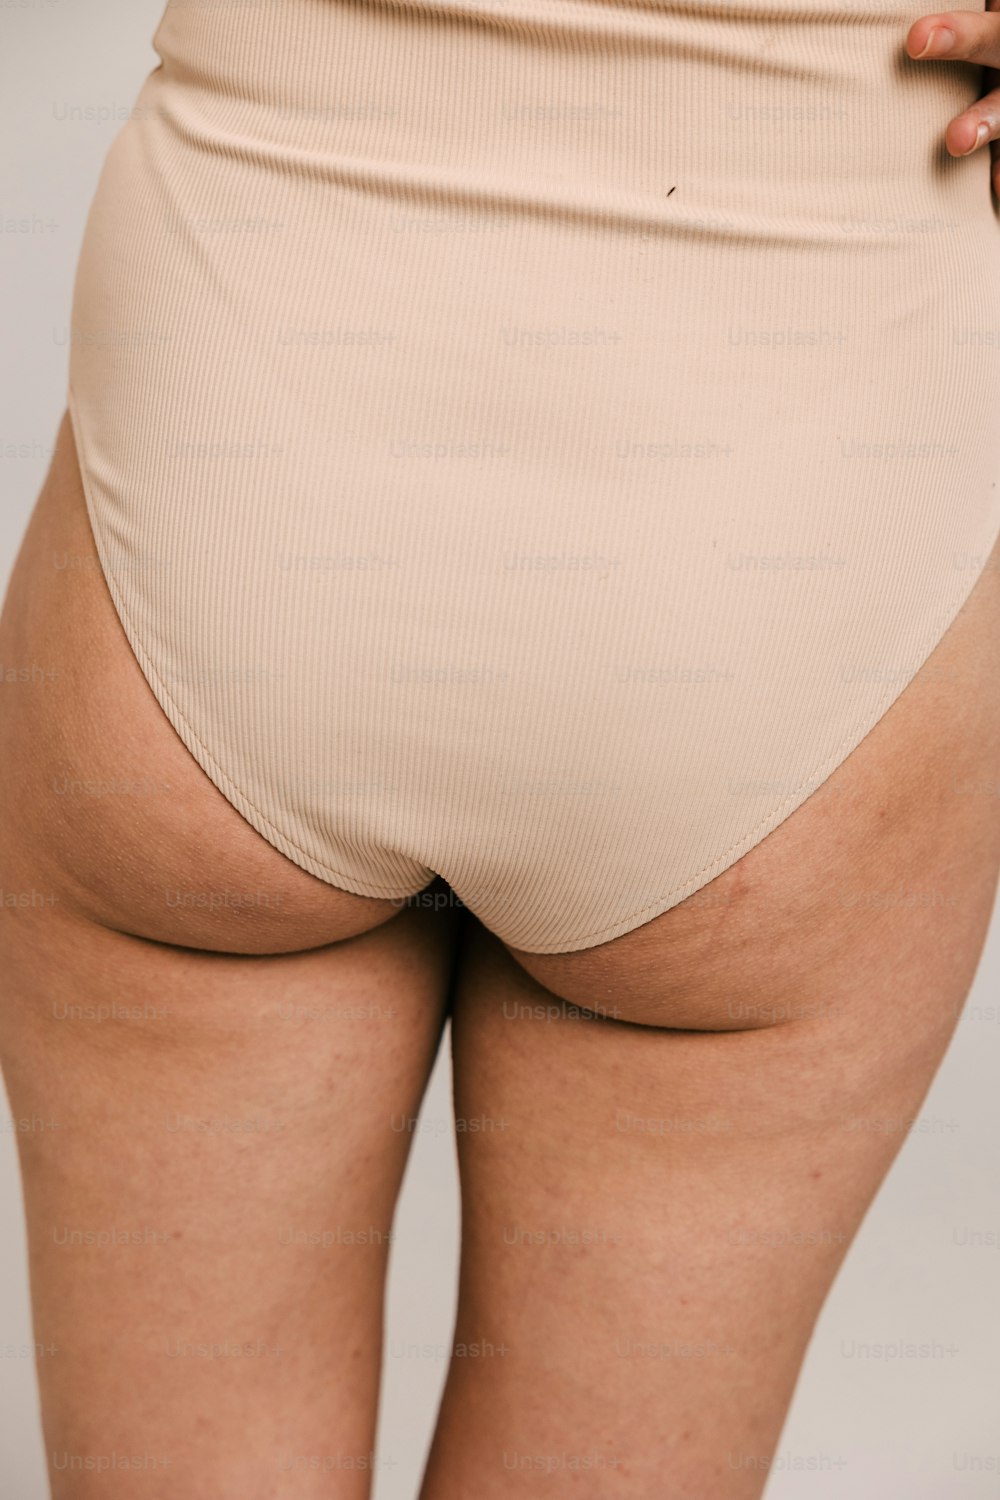 A woman in a tan panties showing her butt photo – Bottom Image on